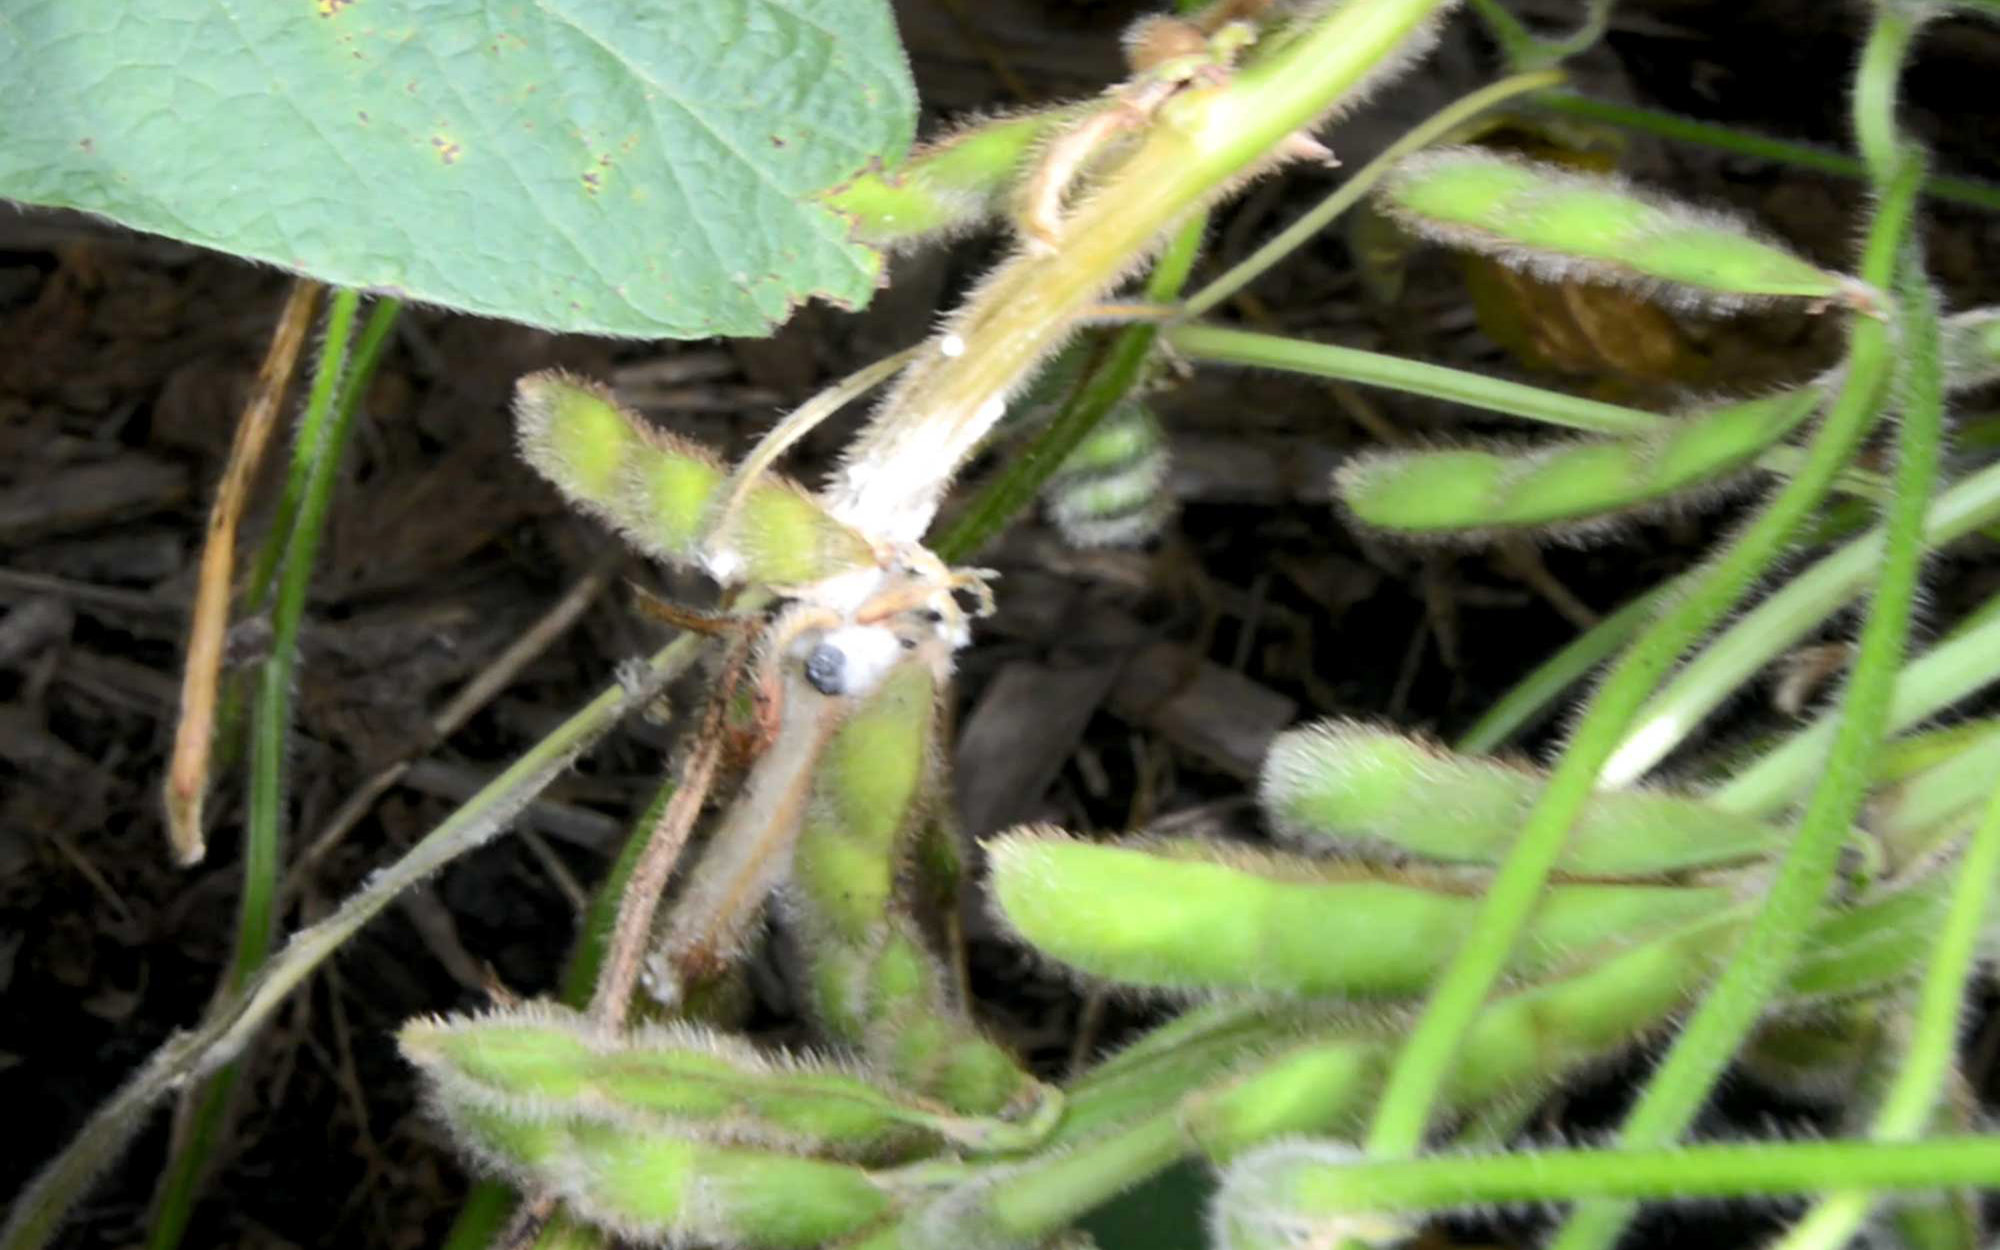 Green soybean plant with white mold present on the stem and pod.